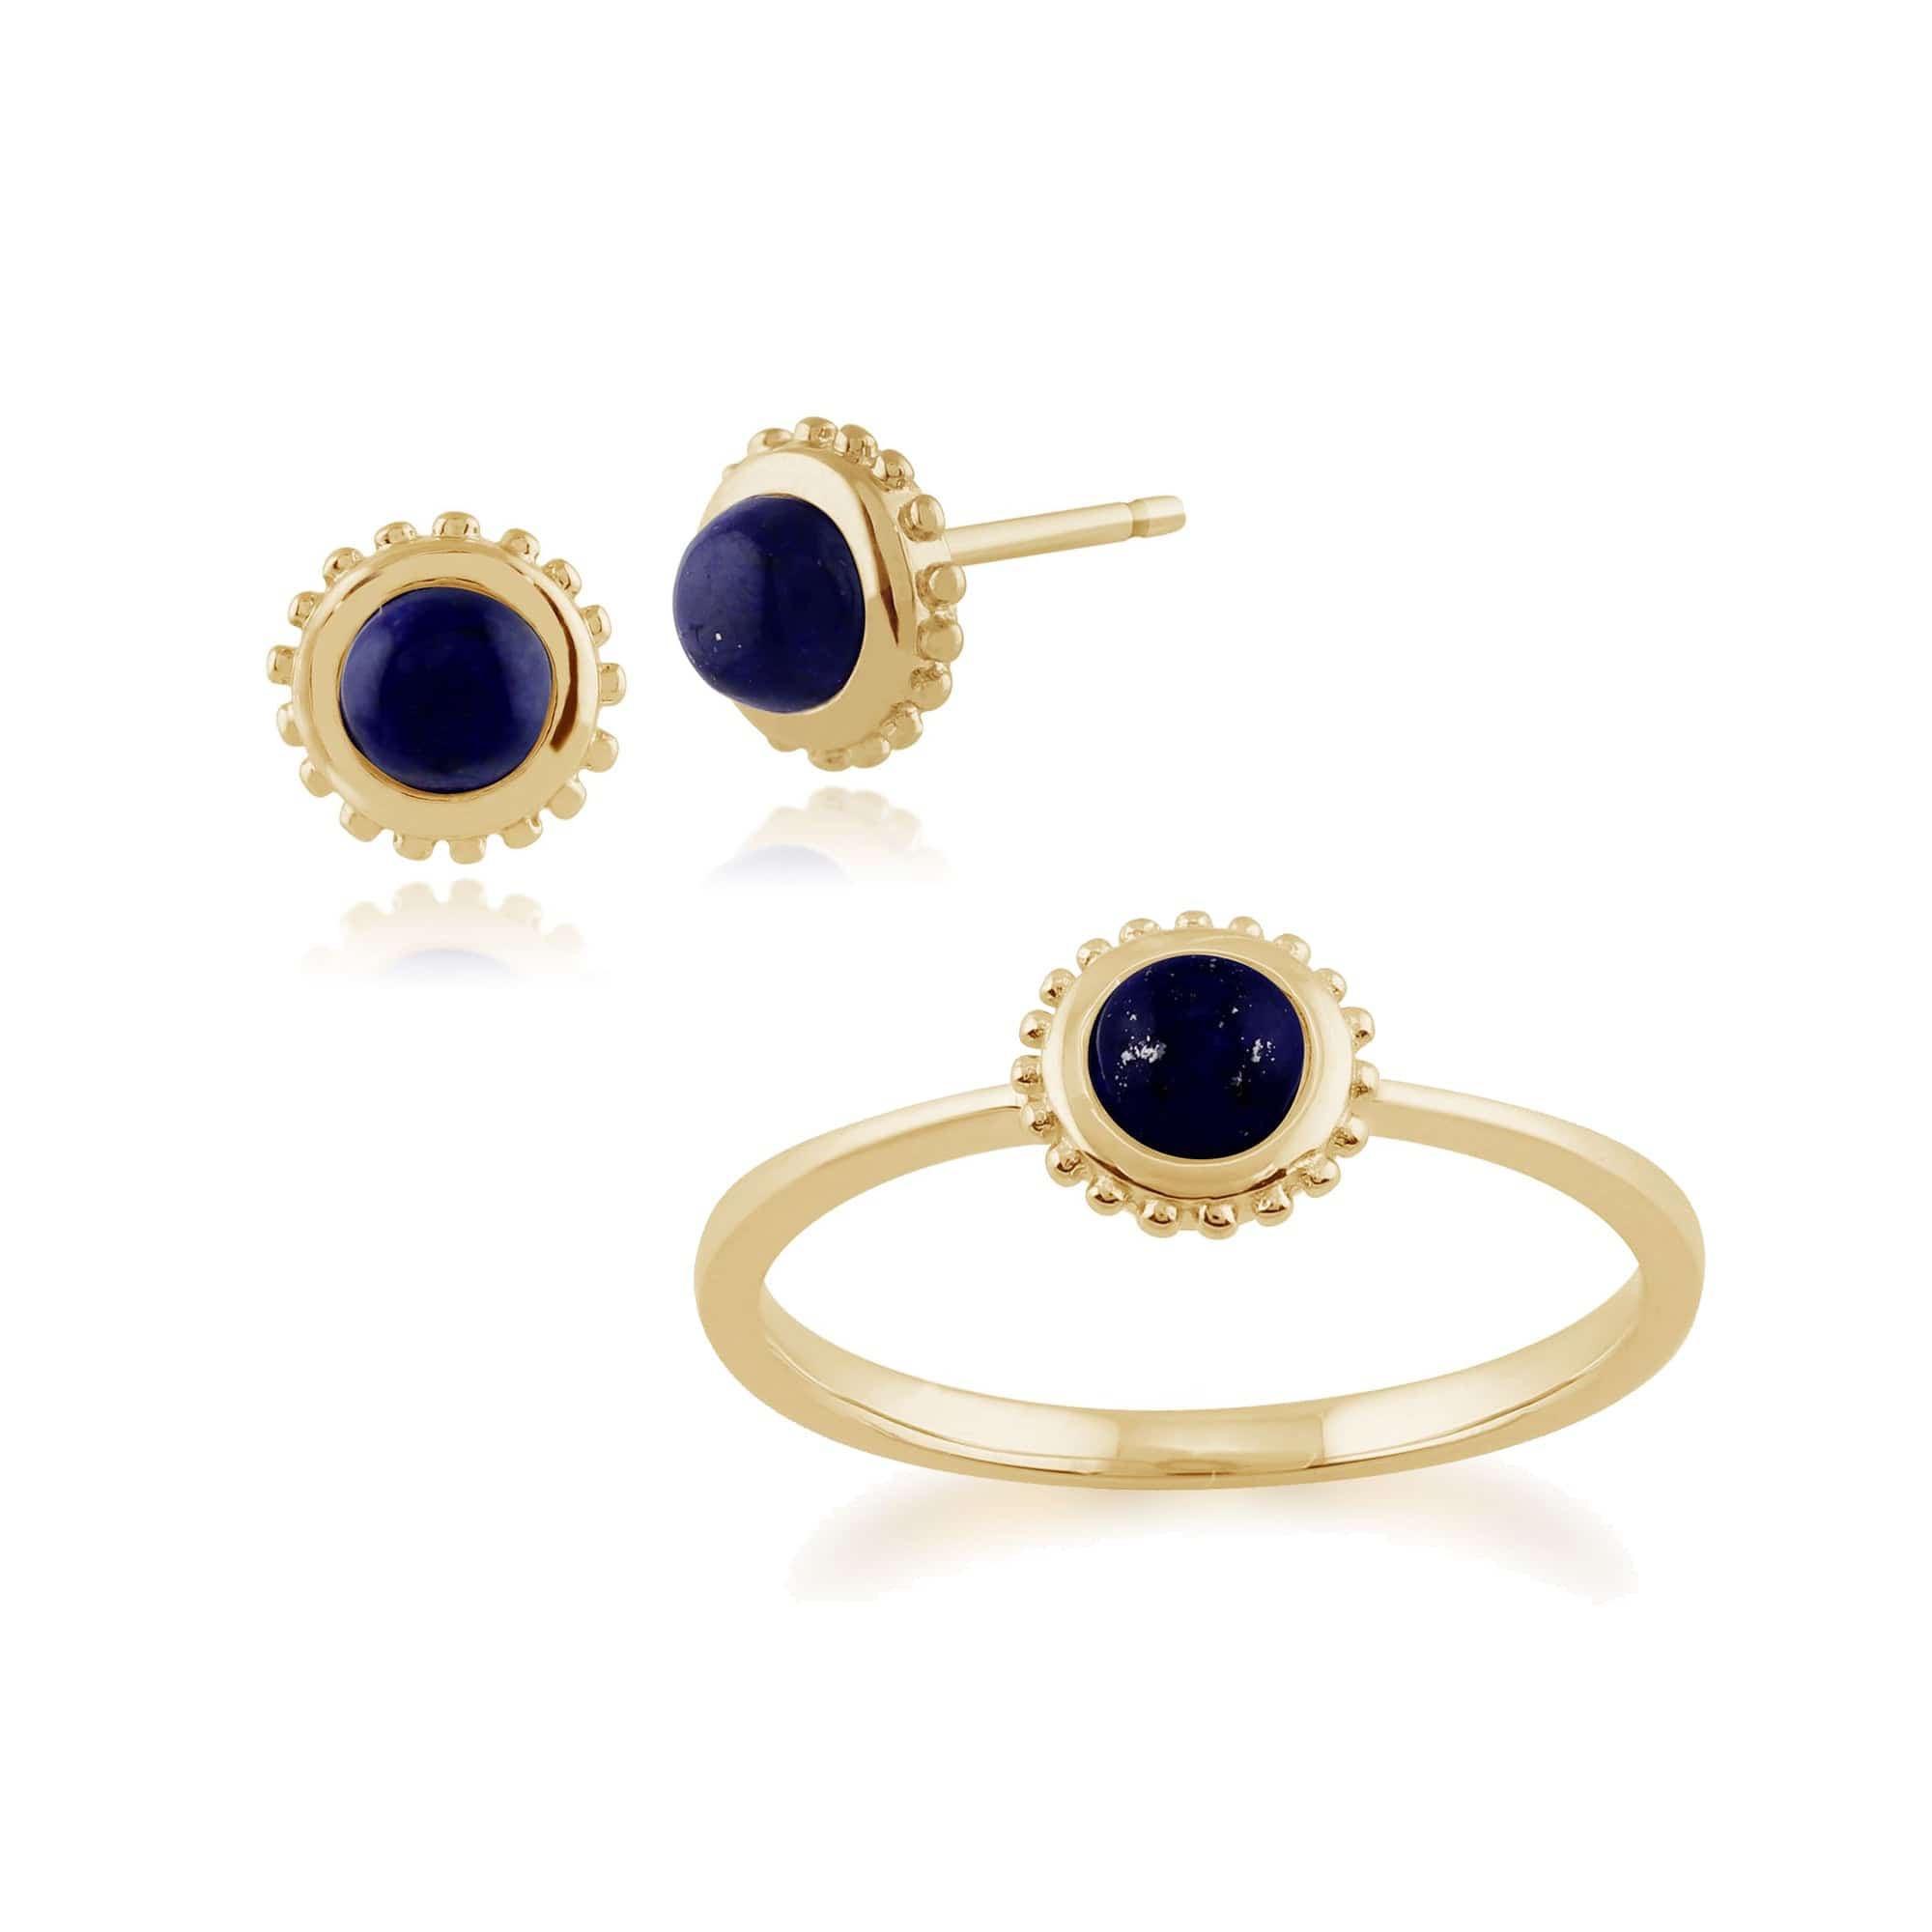 135E1173029-135R1270029 Classic Round Lapis Lazuli Single Stone Stud Earrings & Solitaire Ring Set in 9ct Yellow Gold 1